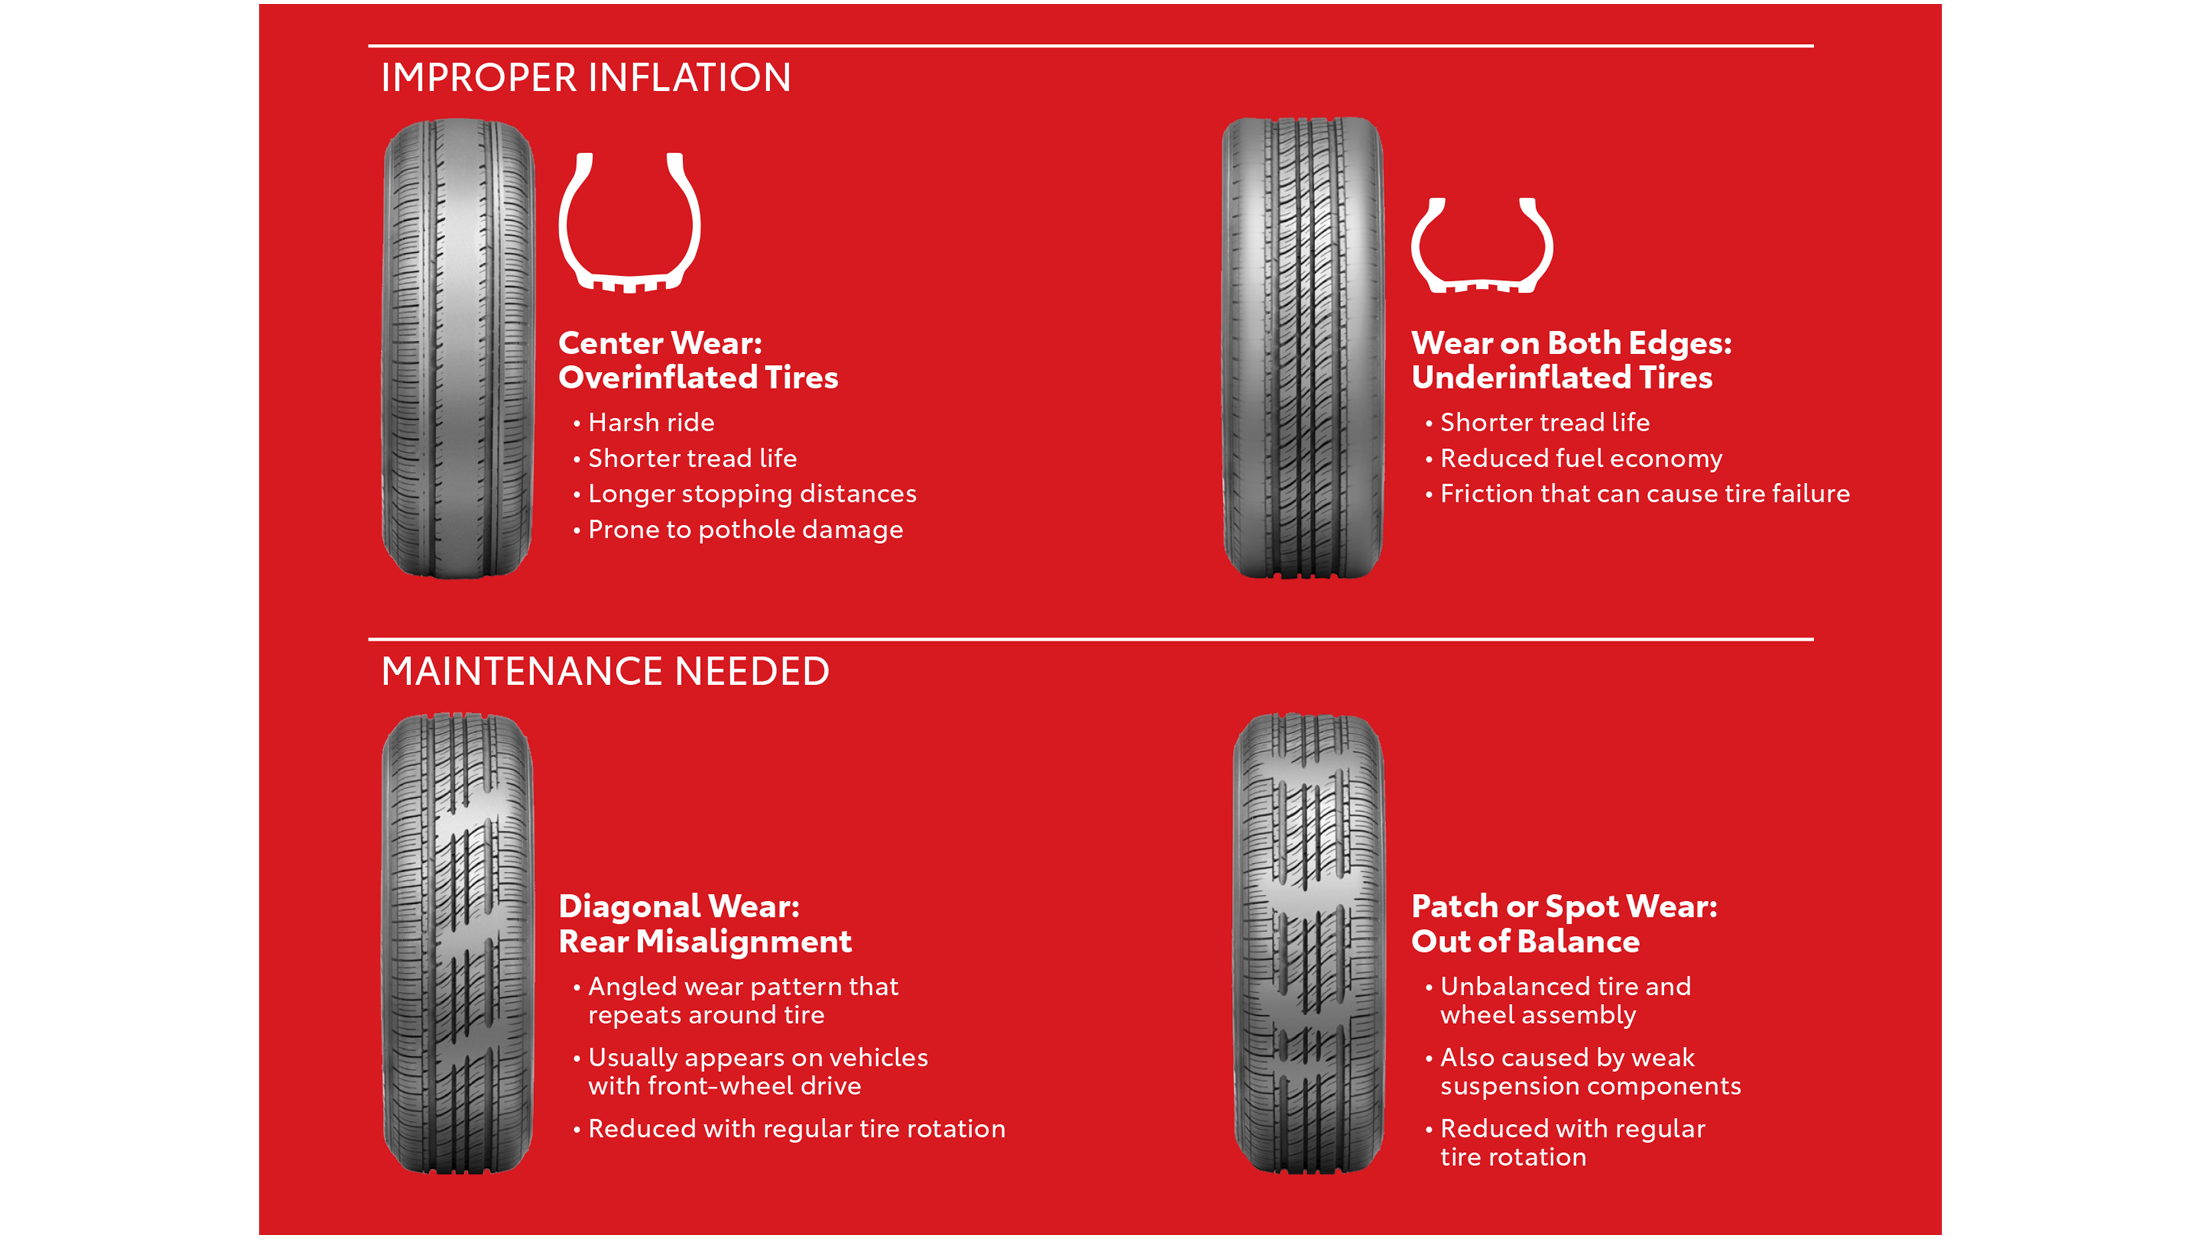 Toyota tire wear improper inflation graphic